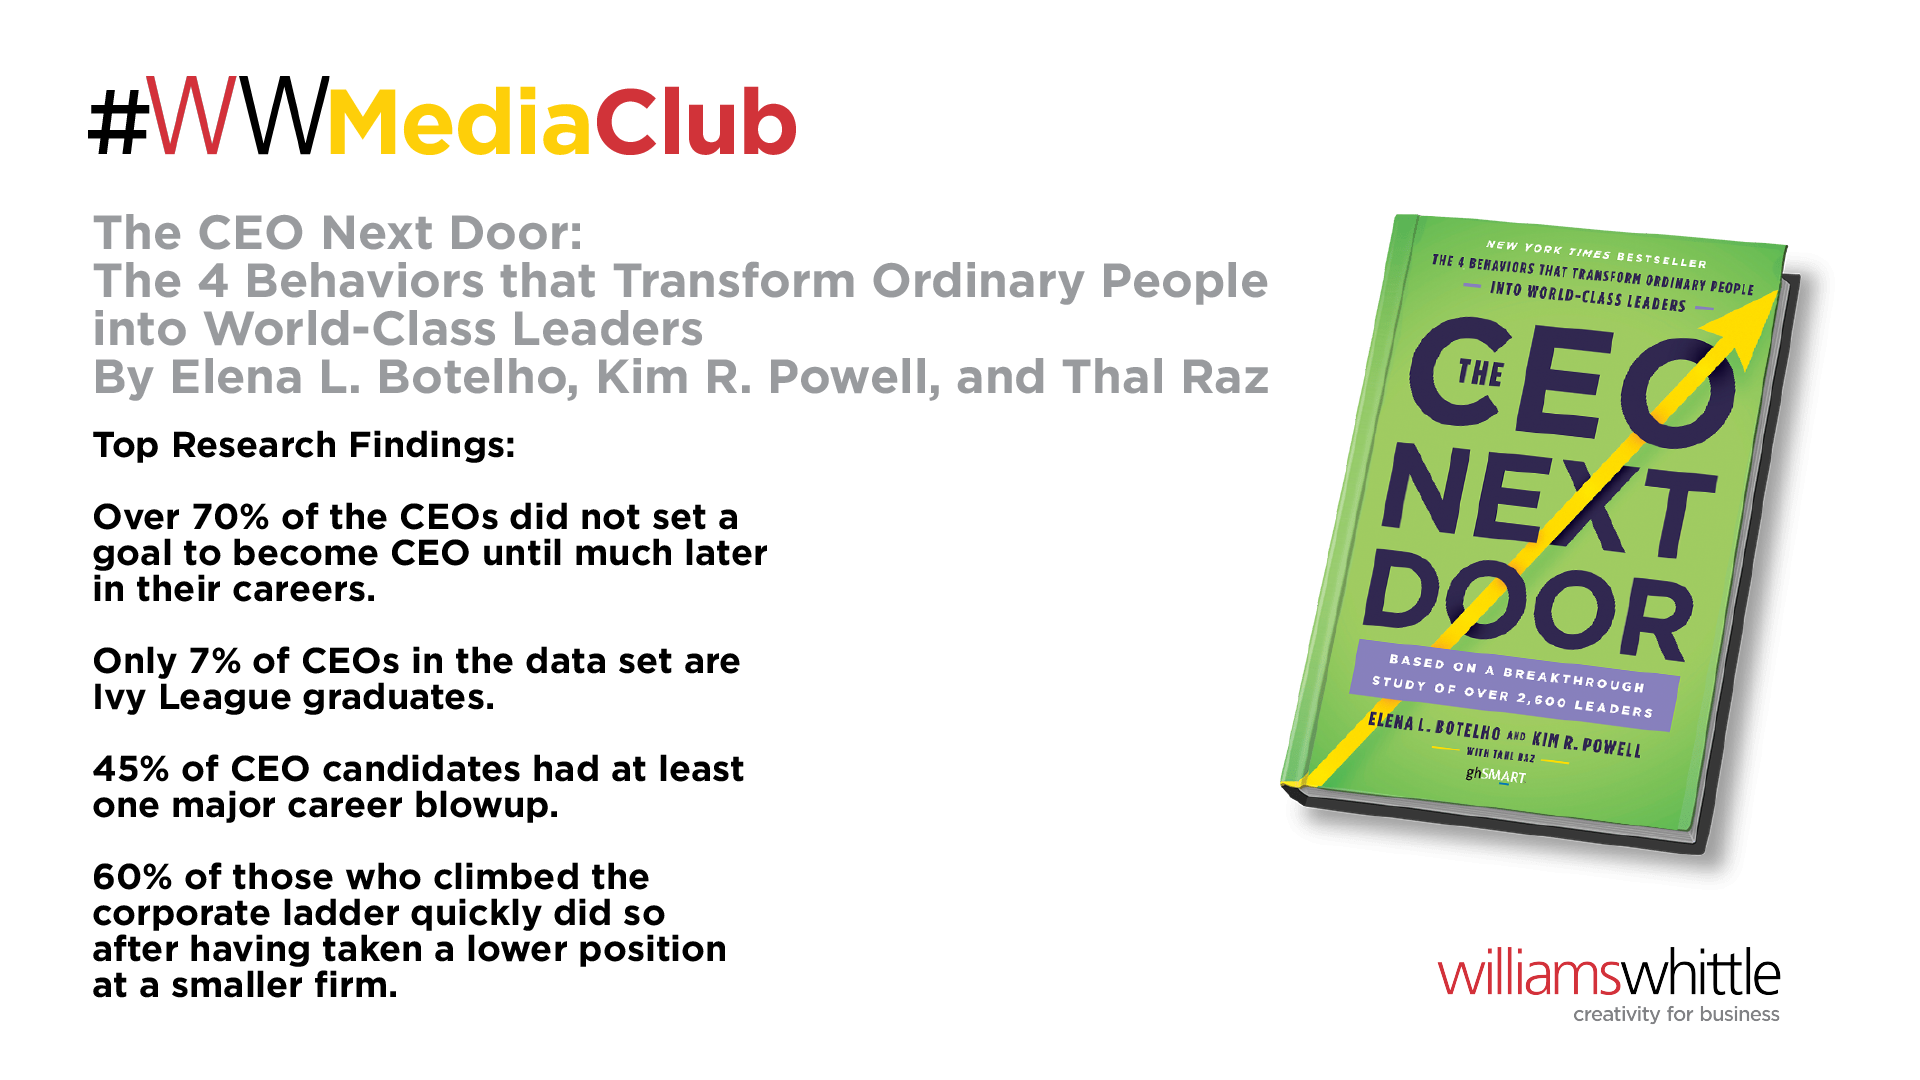 The CEO Next Door: The 4 Behaviors That Transform Ordinary People into World-Class Leaders